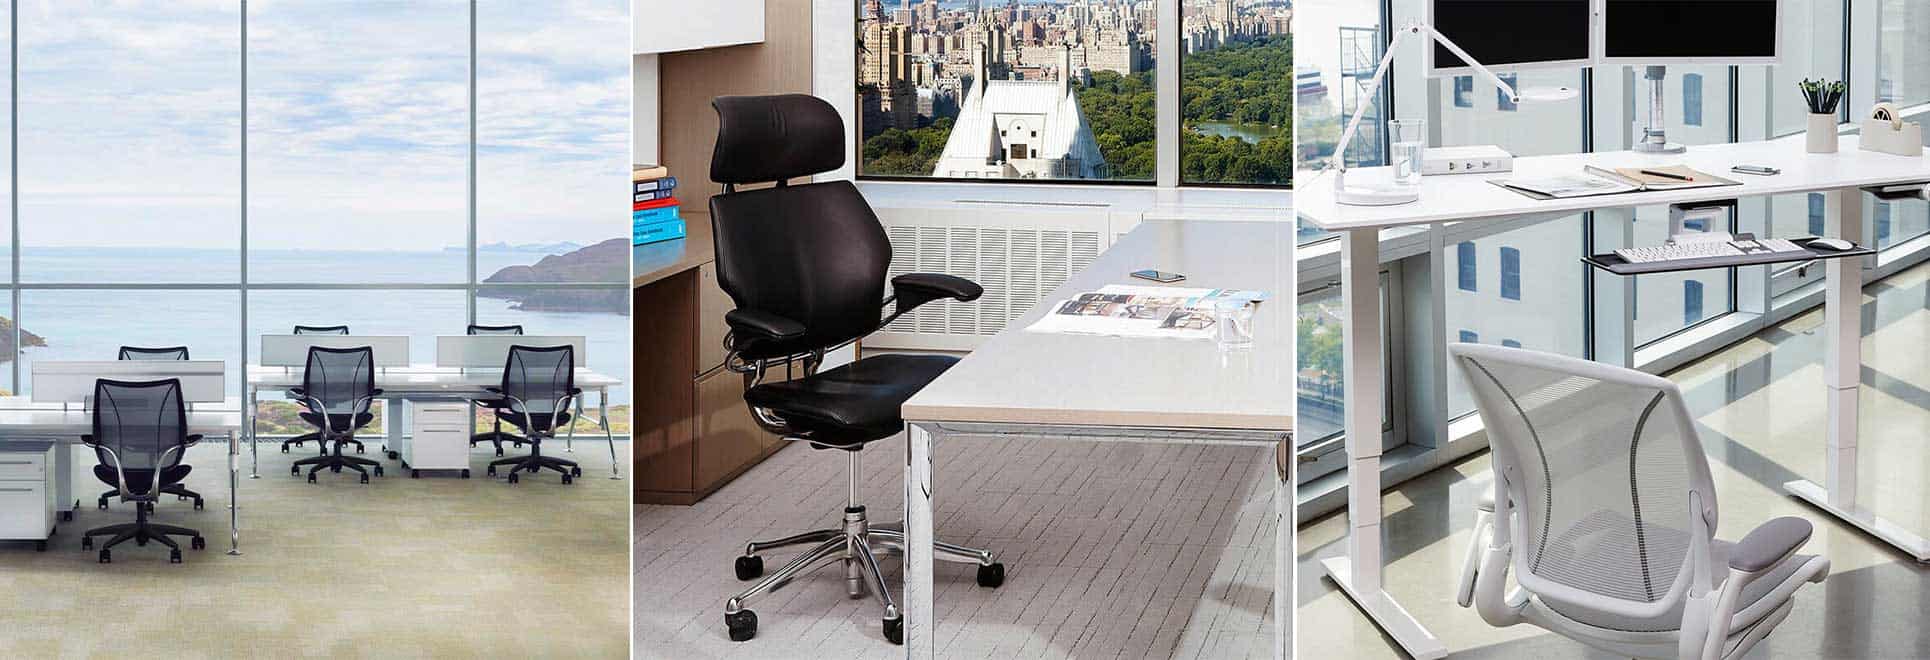 Humanscale Liberty Ocean Chairs and Floating Desks